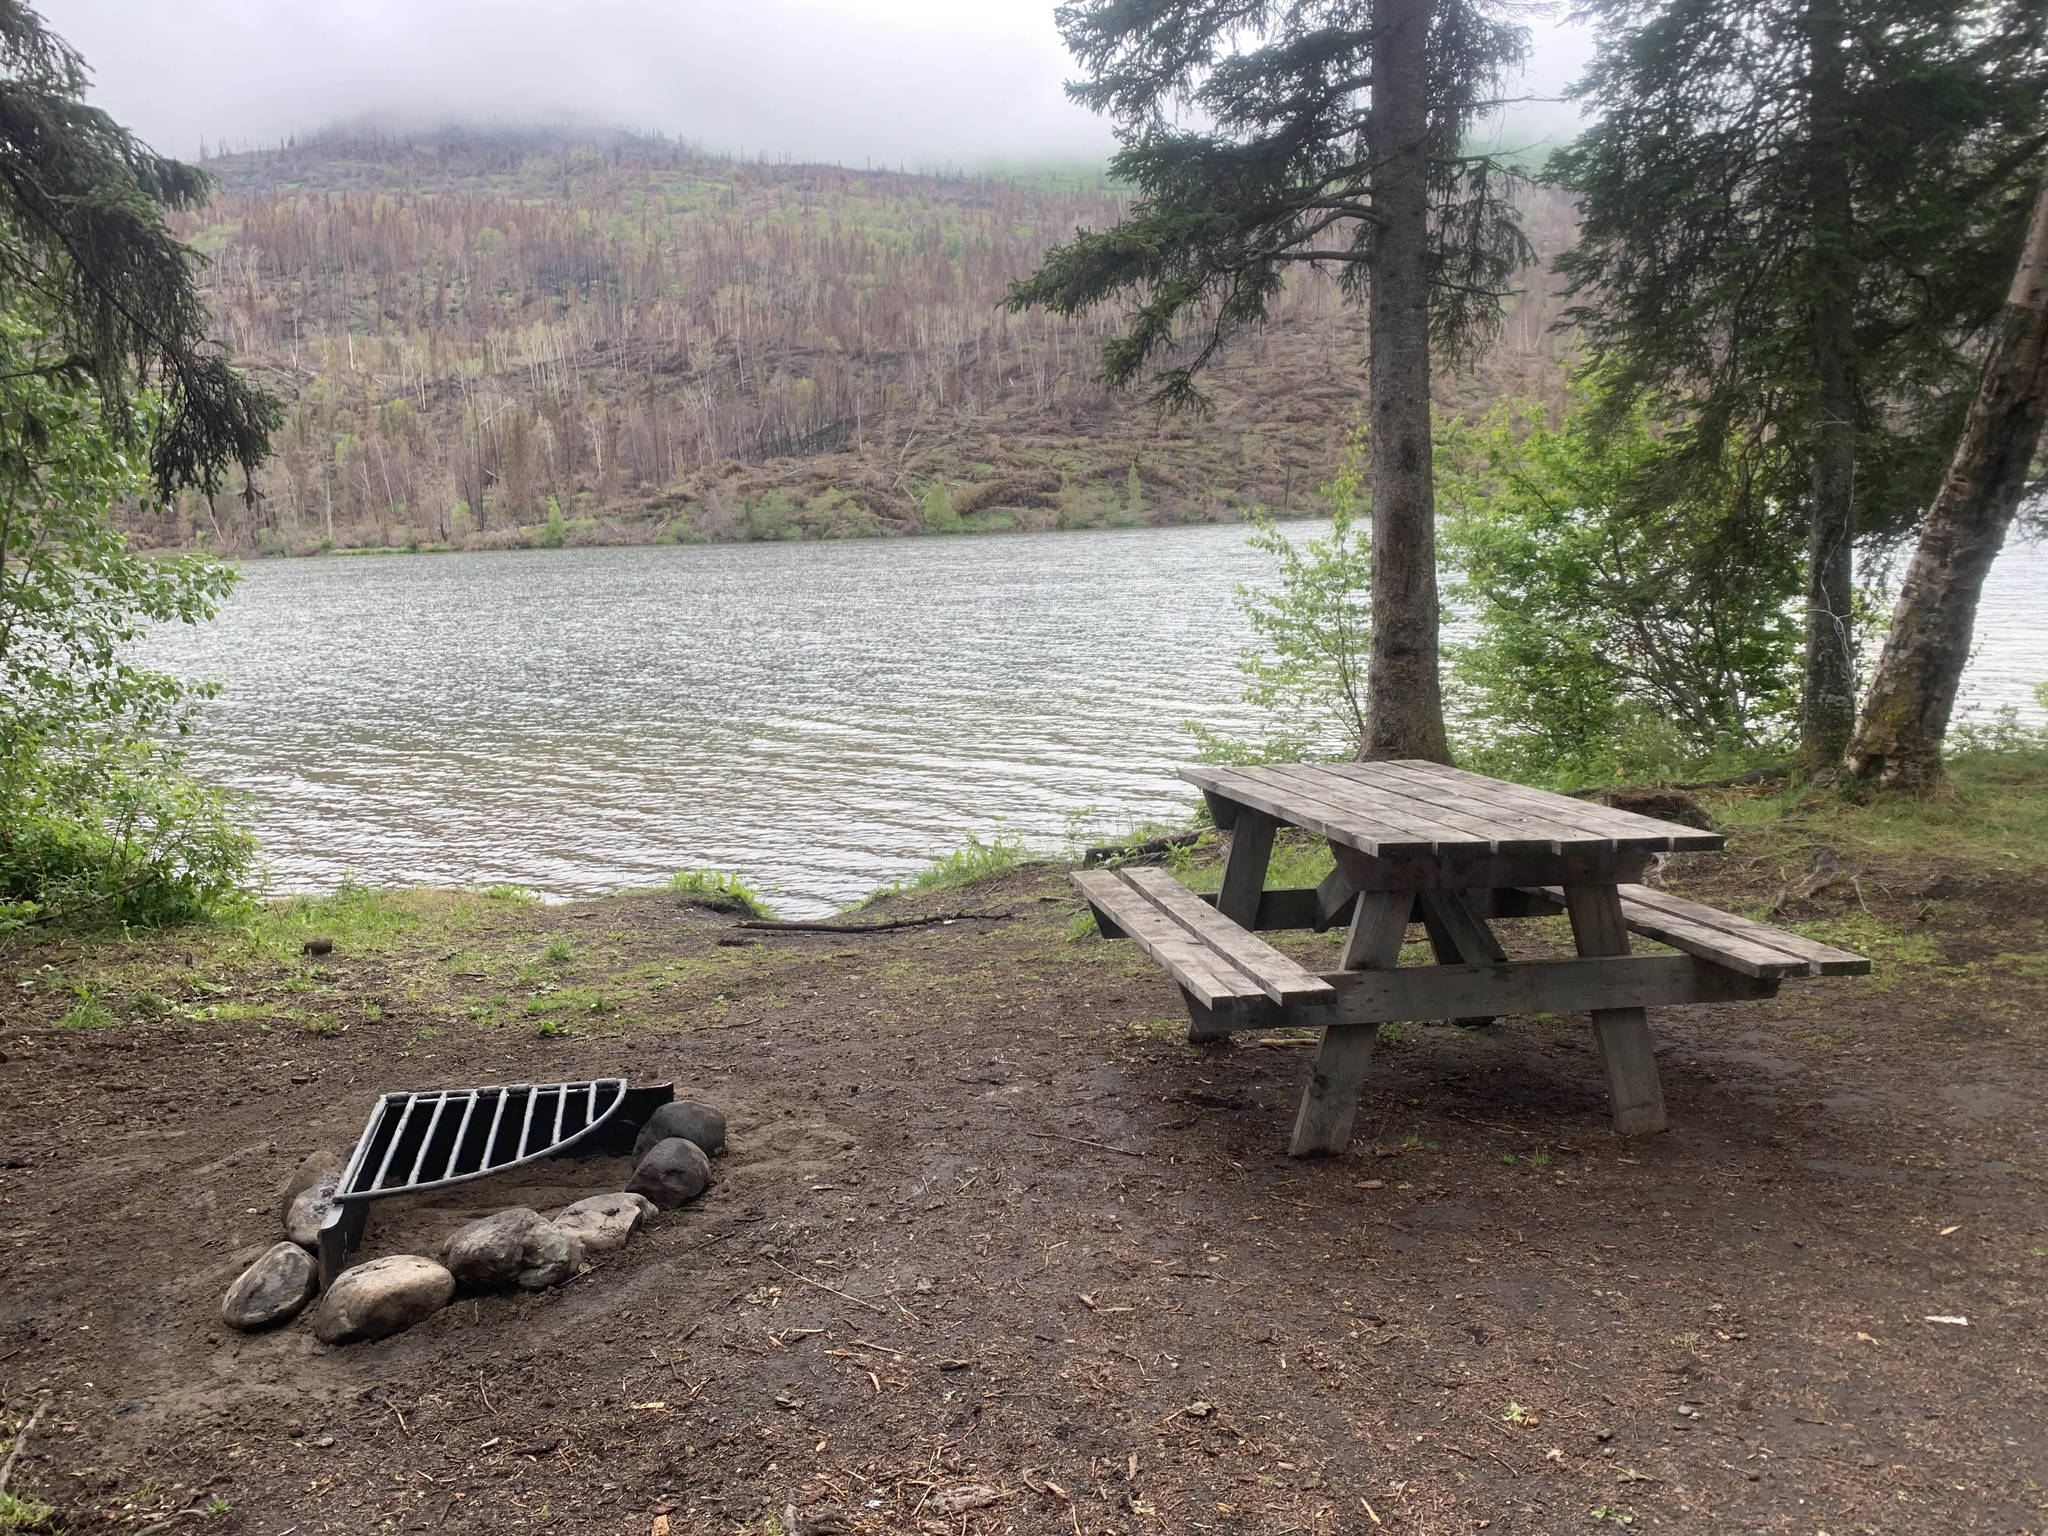 New fire pits and picnic tables were installed at Jean Lake Campground in summer 2020. (Photo by Nick Longobardi/USFWS)